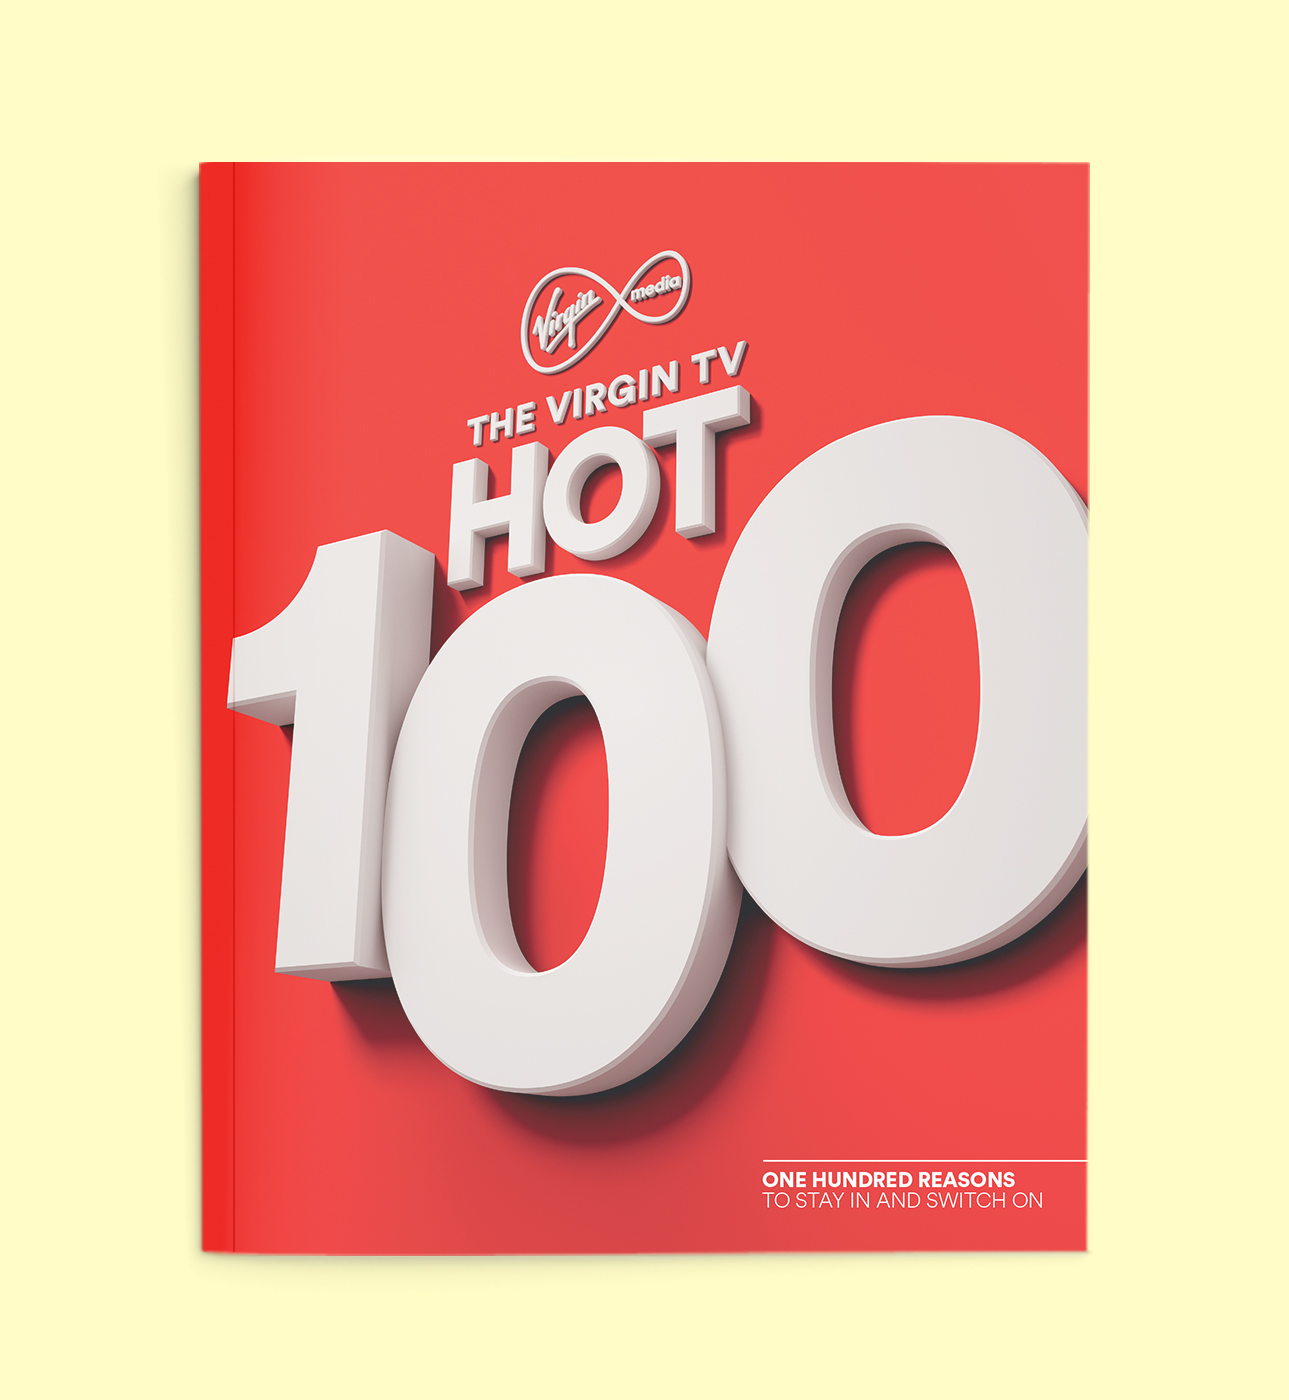 The Hot 100